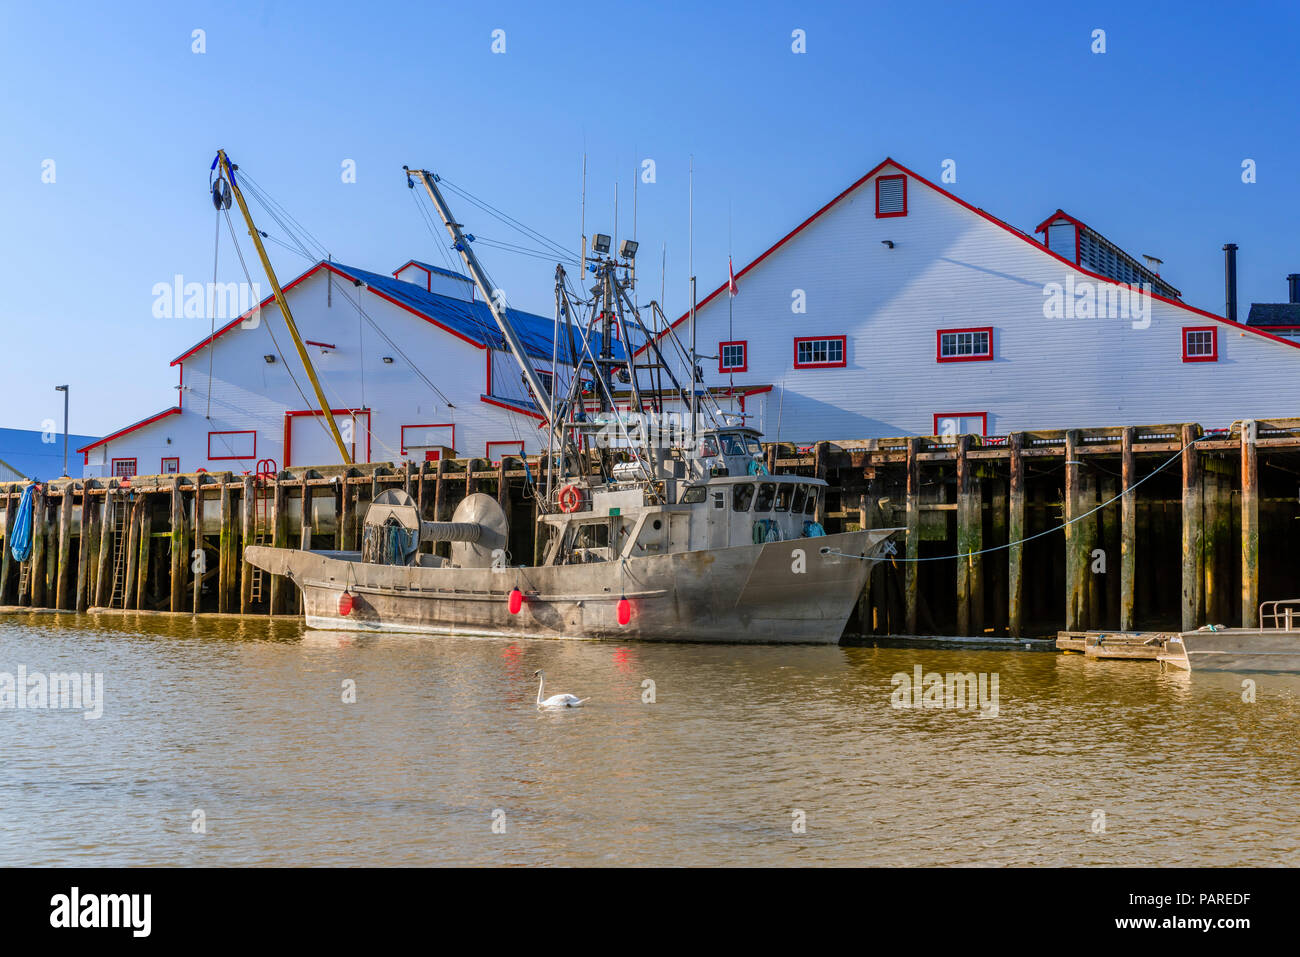 A fishing boat stands near the pier near the warehouses, a white swan floats along the water in the foreground, a blue sky in the background Stock Photo